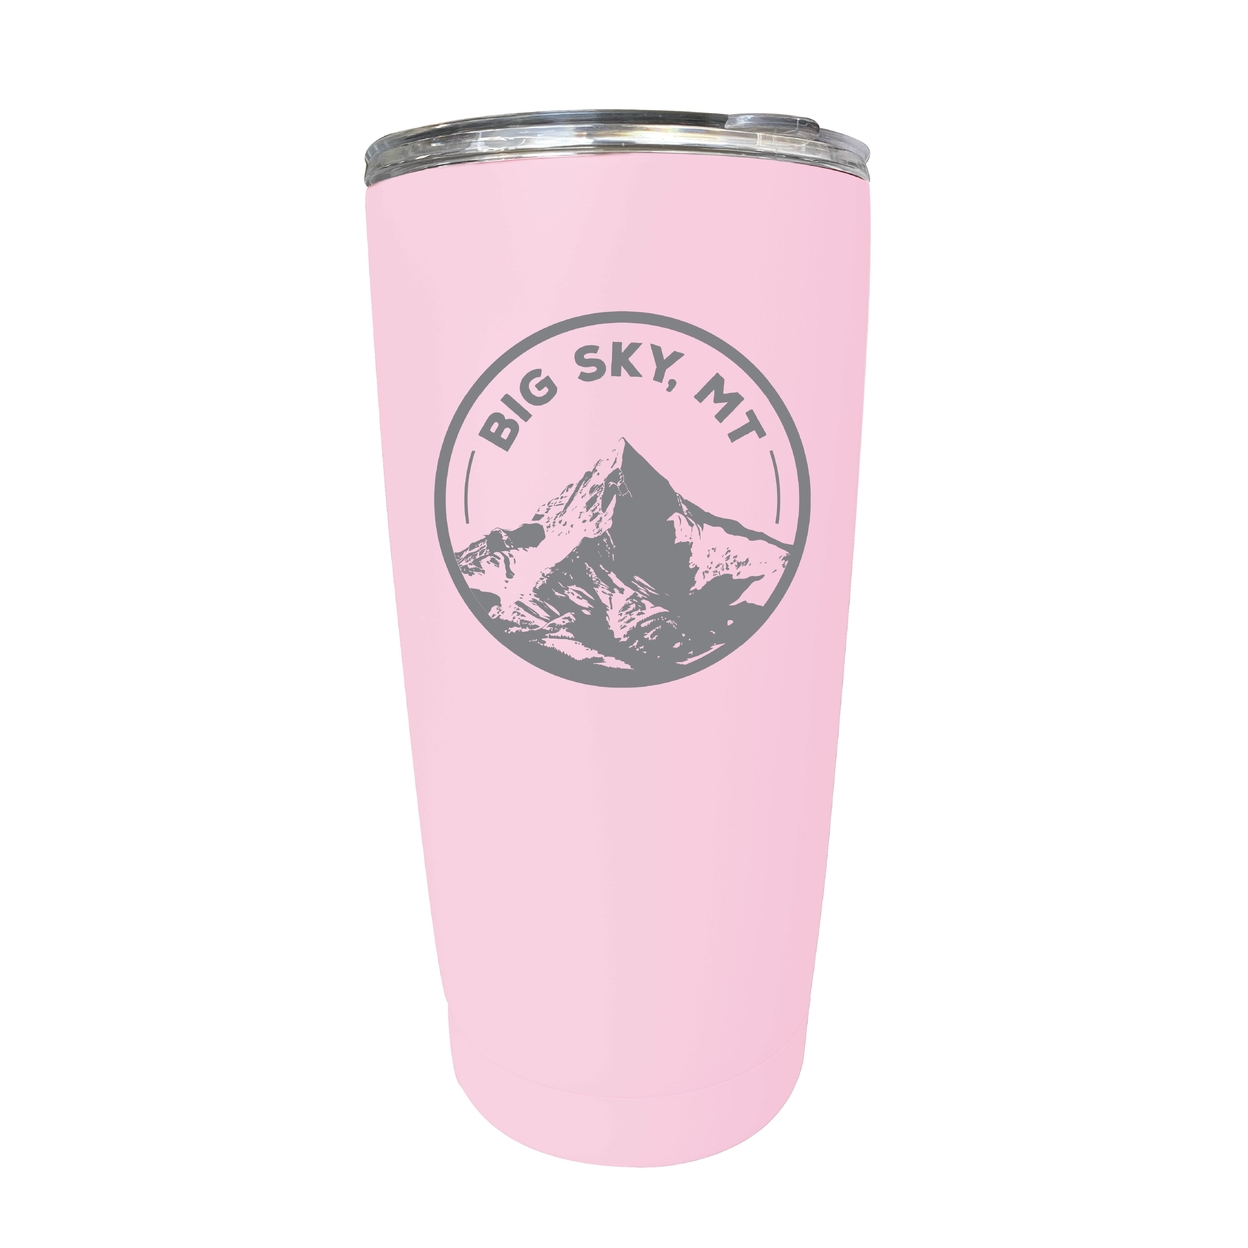 Big Sky Montana Souvenir 16 Oz Engraved Stainless Steel Insulated Tumbler - Pink,,2-Pack